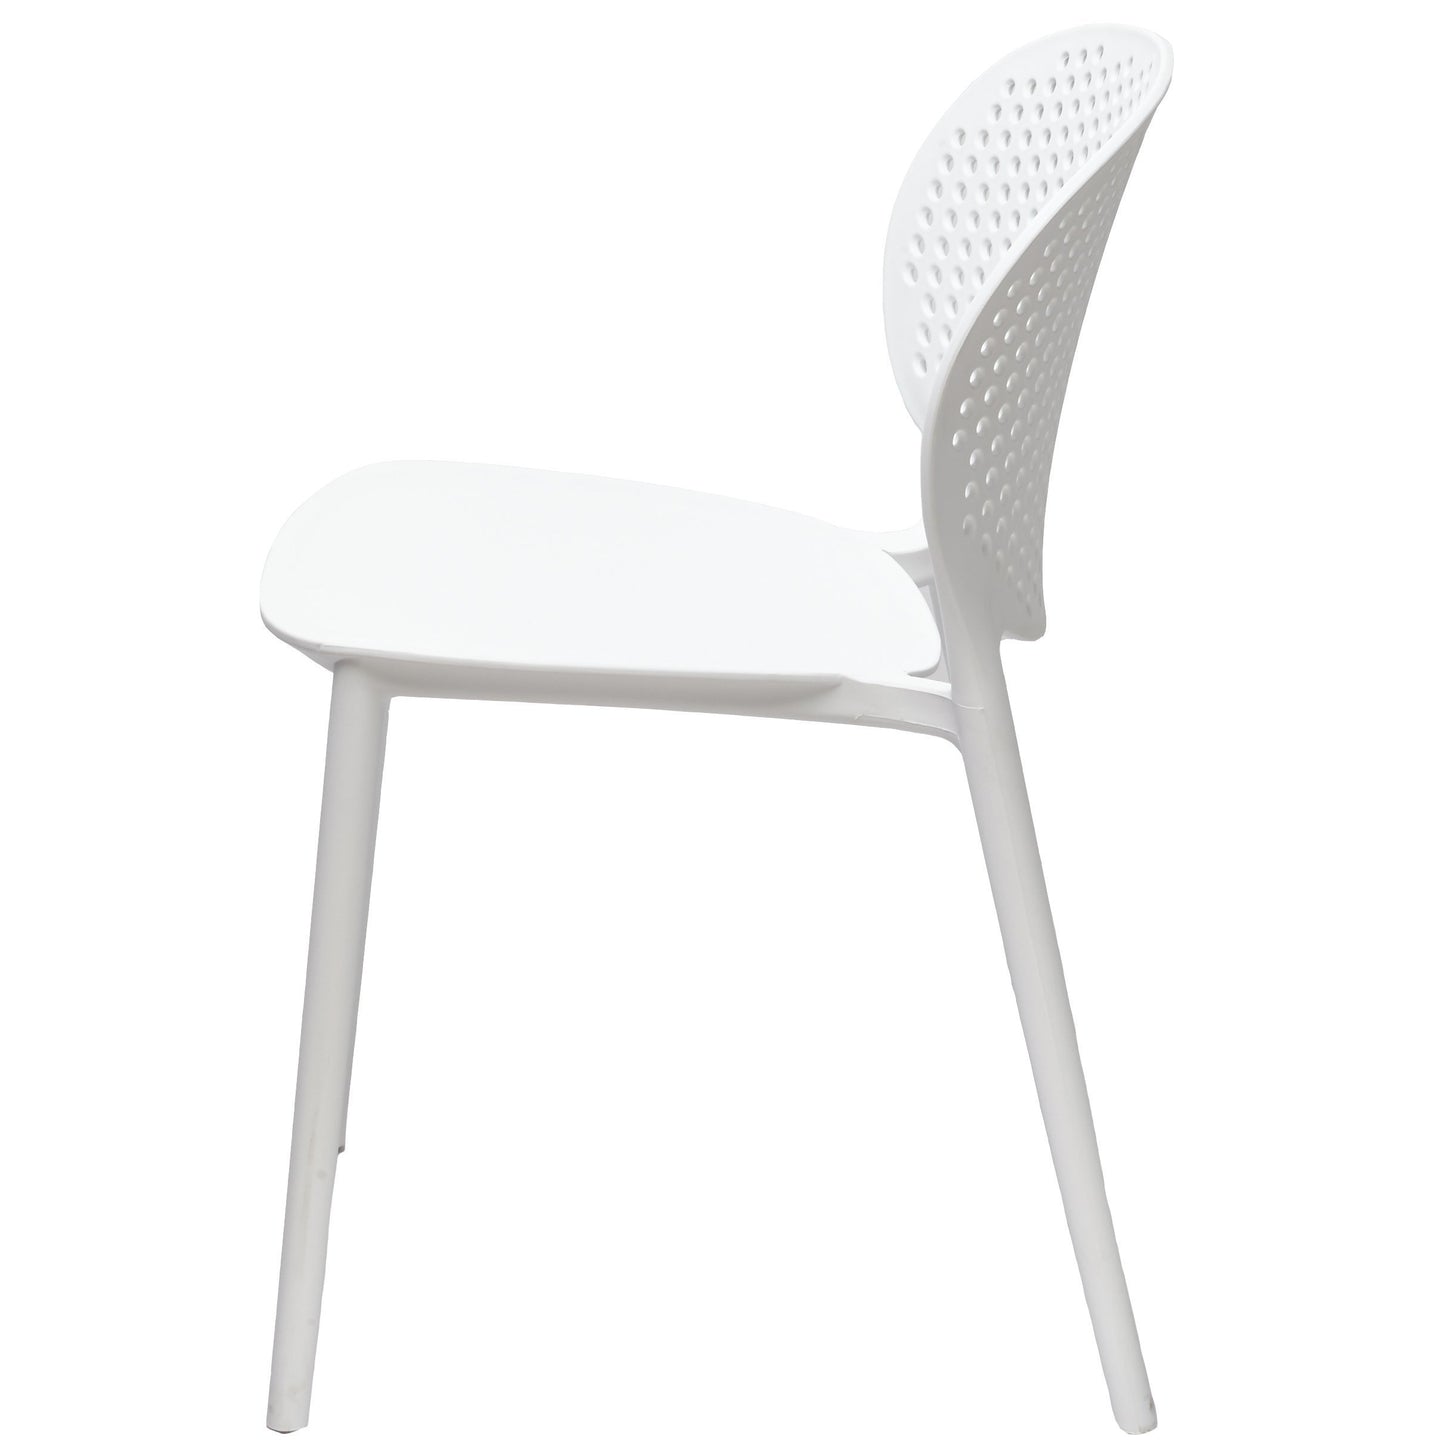 The best 2xhome white contemporary modern stackable assembled plastic chair molded with back armless side matte for dining room living designer outdoor lightweight garden patio balcony work office desk kitchen